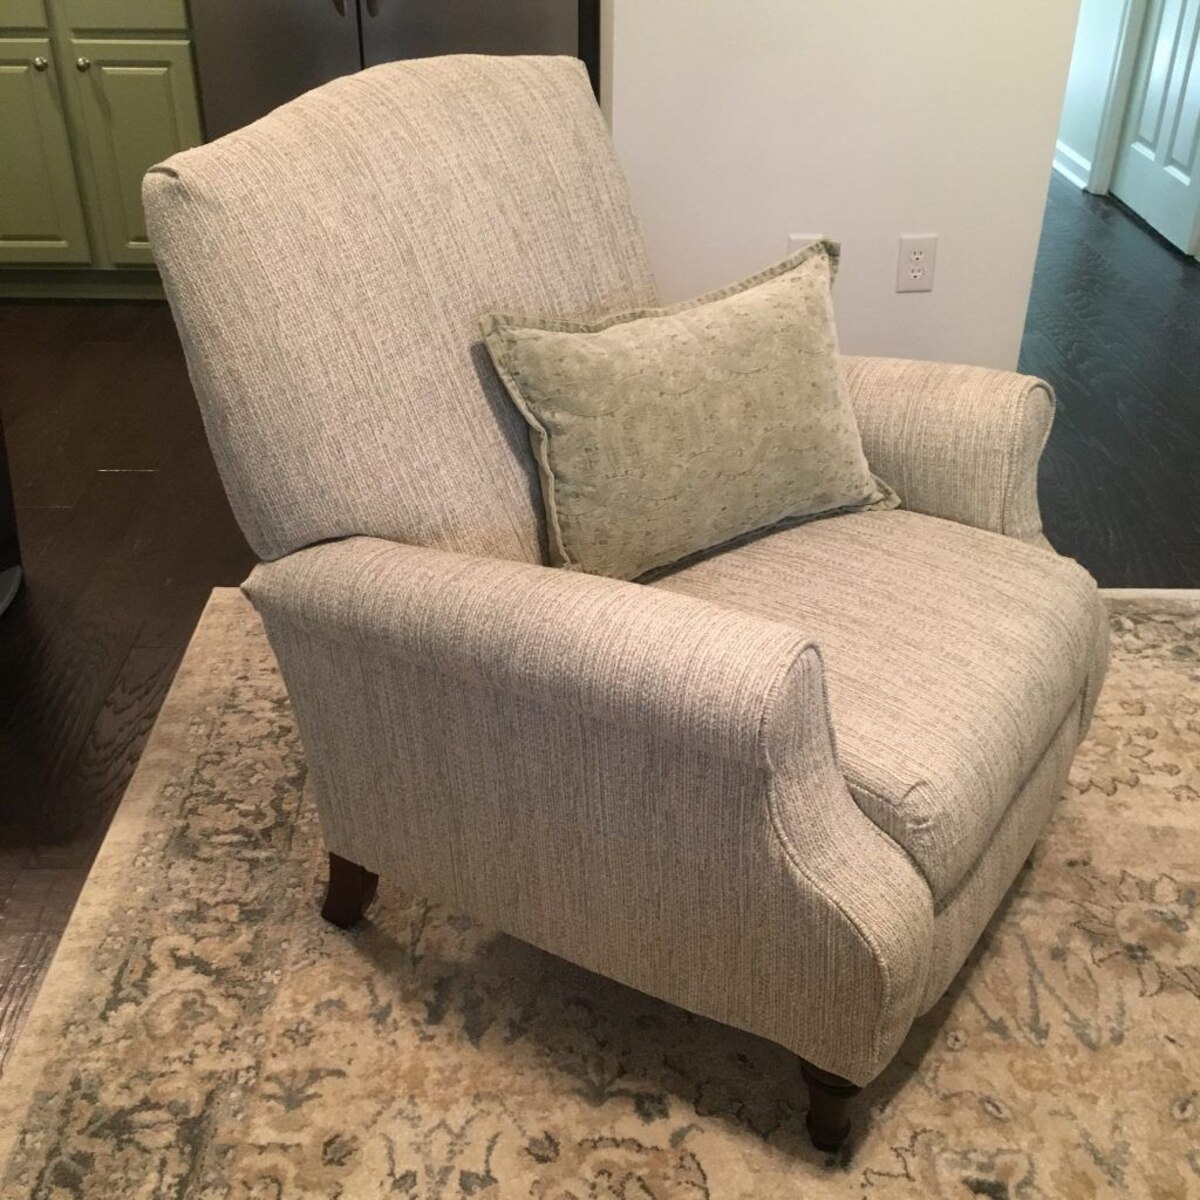 How Much Fabric Do I Need To Reupholster A Recliner